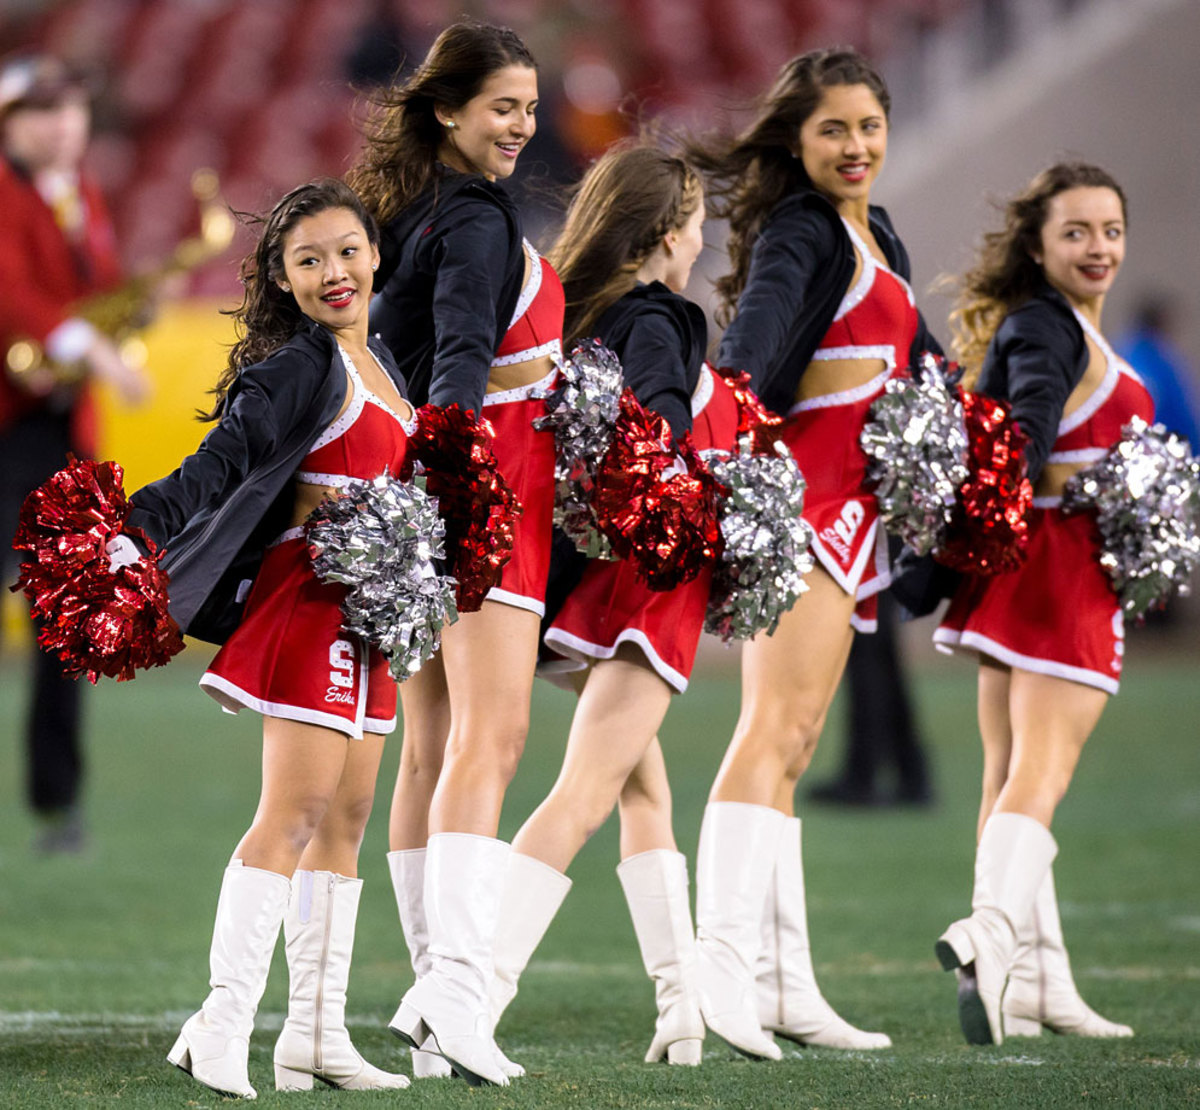 Foster-Farms-Bowl-Stanford-cheerleaders-CDT20141230068_maryland_at_Stanford.jpg